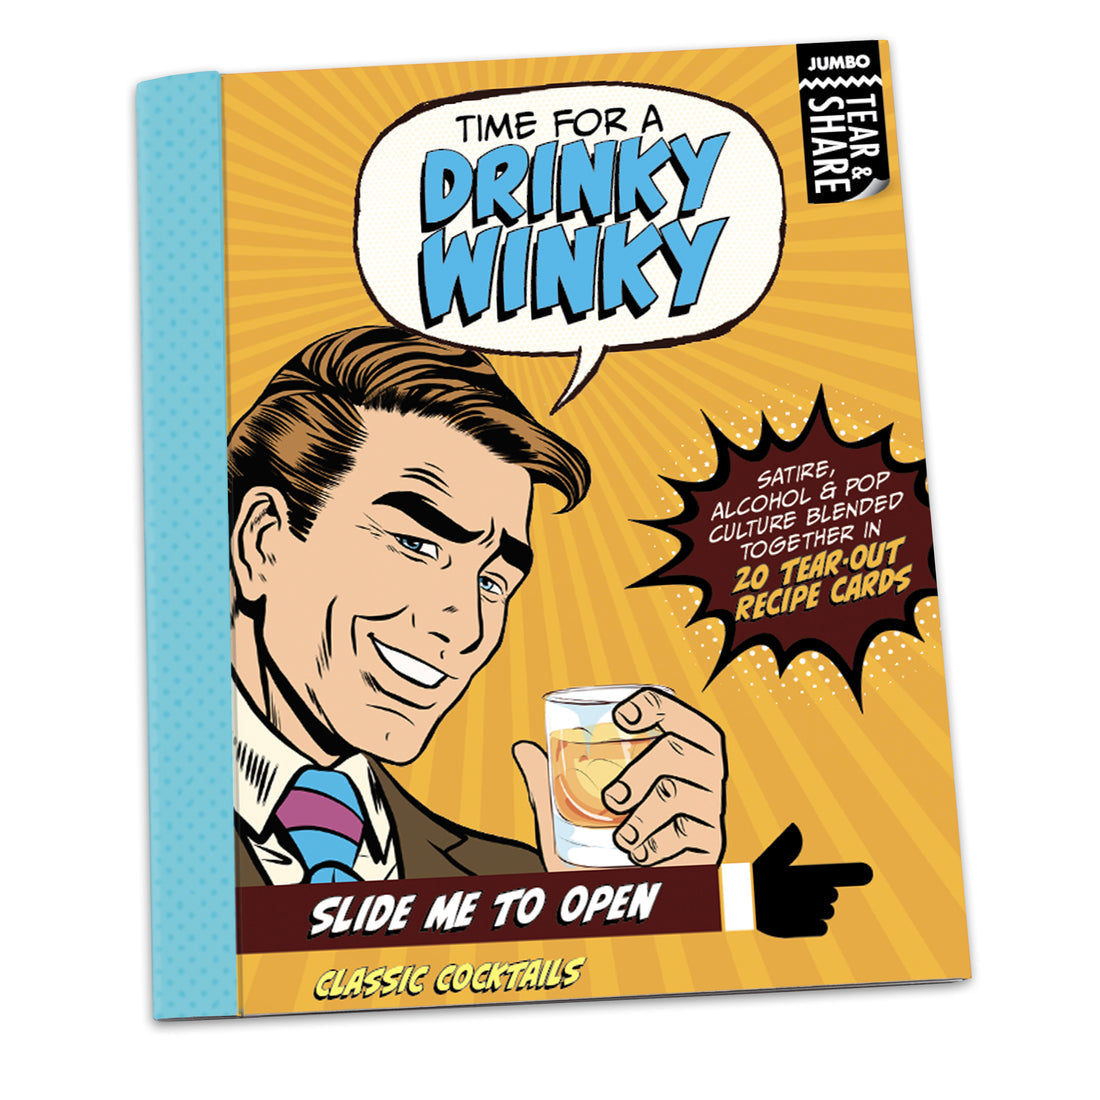 TIME FOR A DRINKY WINKY! - CLASSIC COCKTAIL RECIPE JUMBO NOTE CARDS